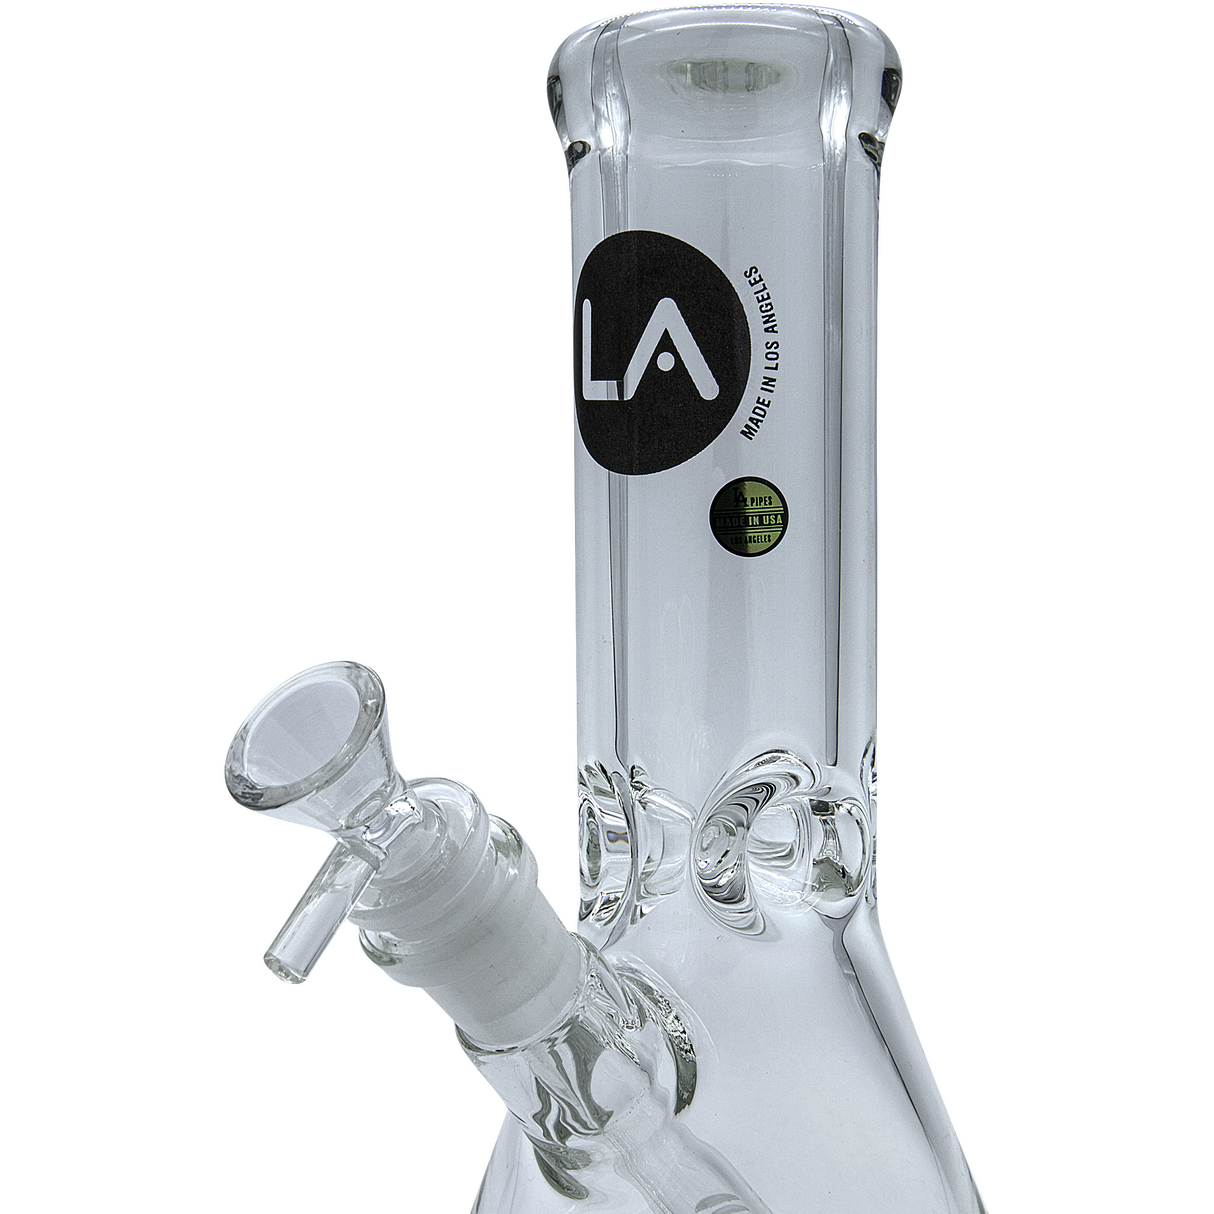 LA Pipes "Agent Stout" Beaker Bong, 9mm Thick Borosilicate Glass, Front View on White